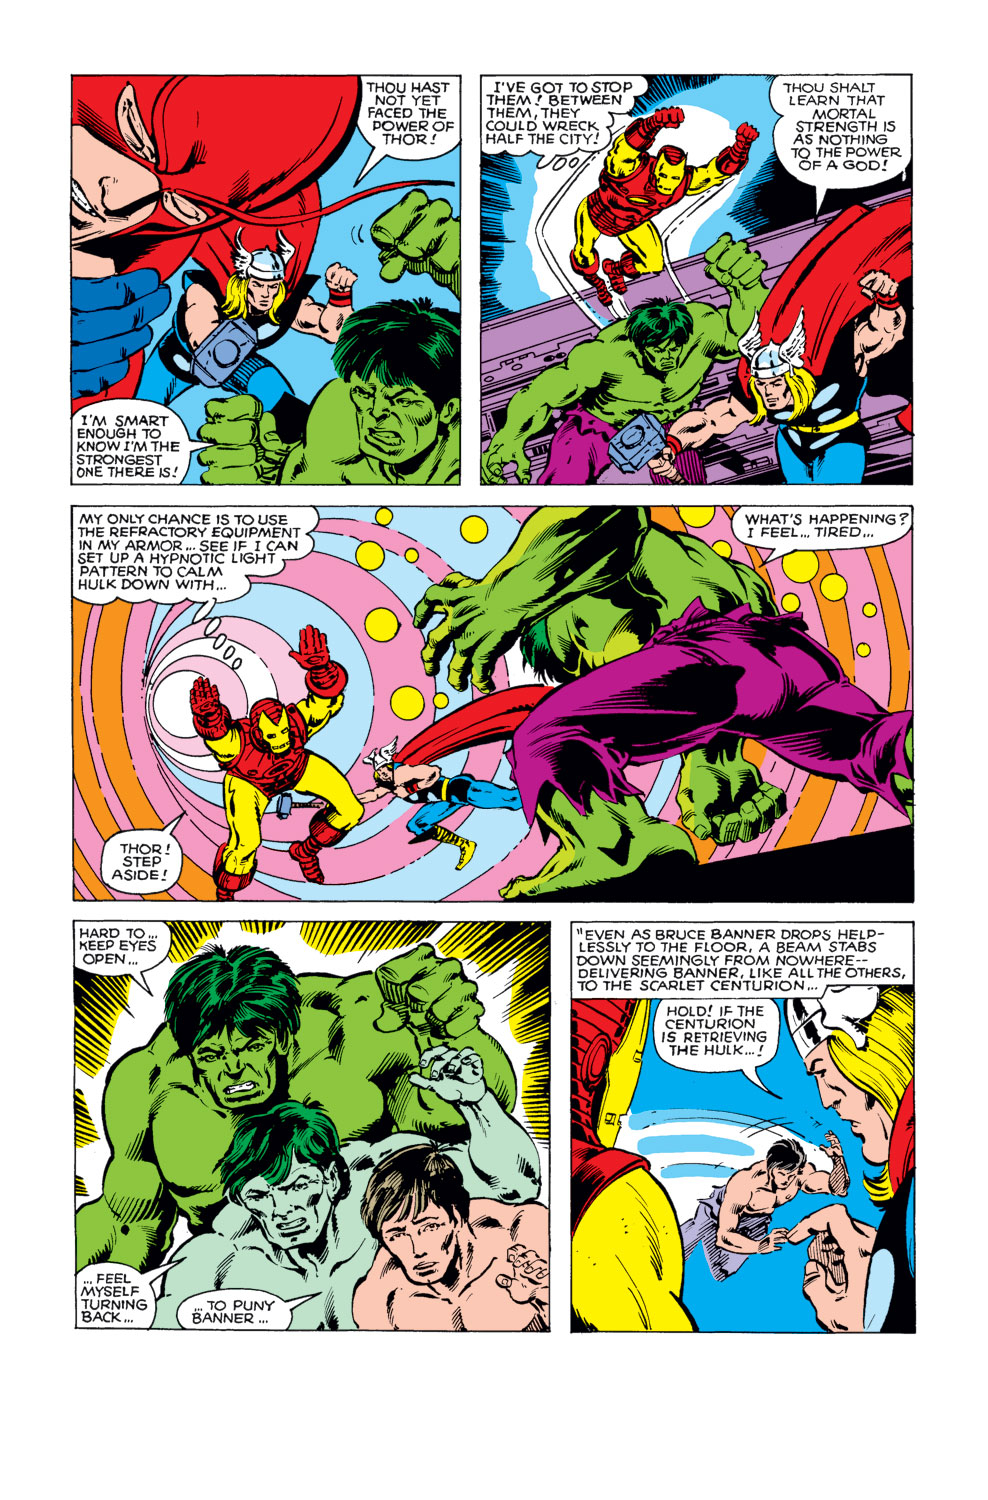 What If? (1977) issue 29 - The Avengers defeated everybody - Page 11